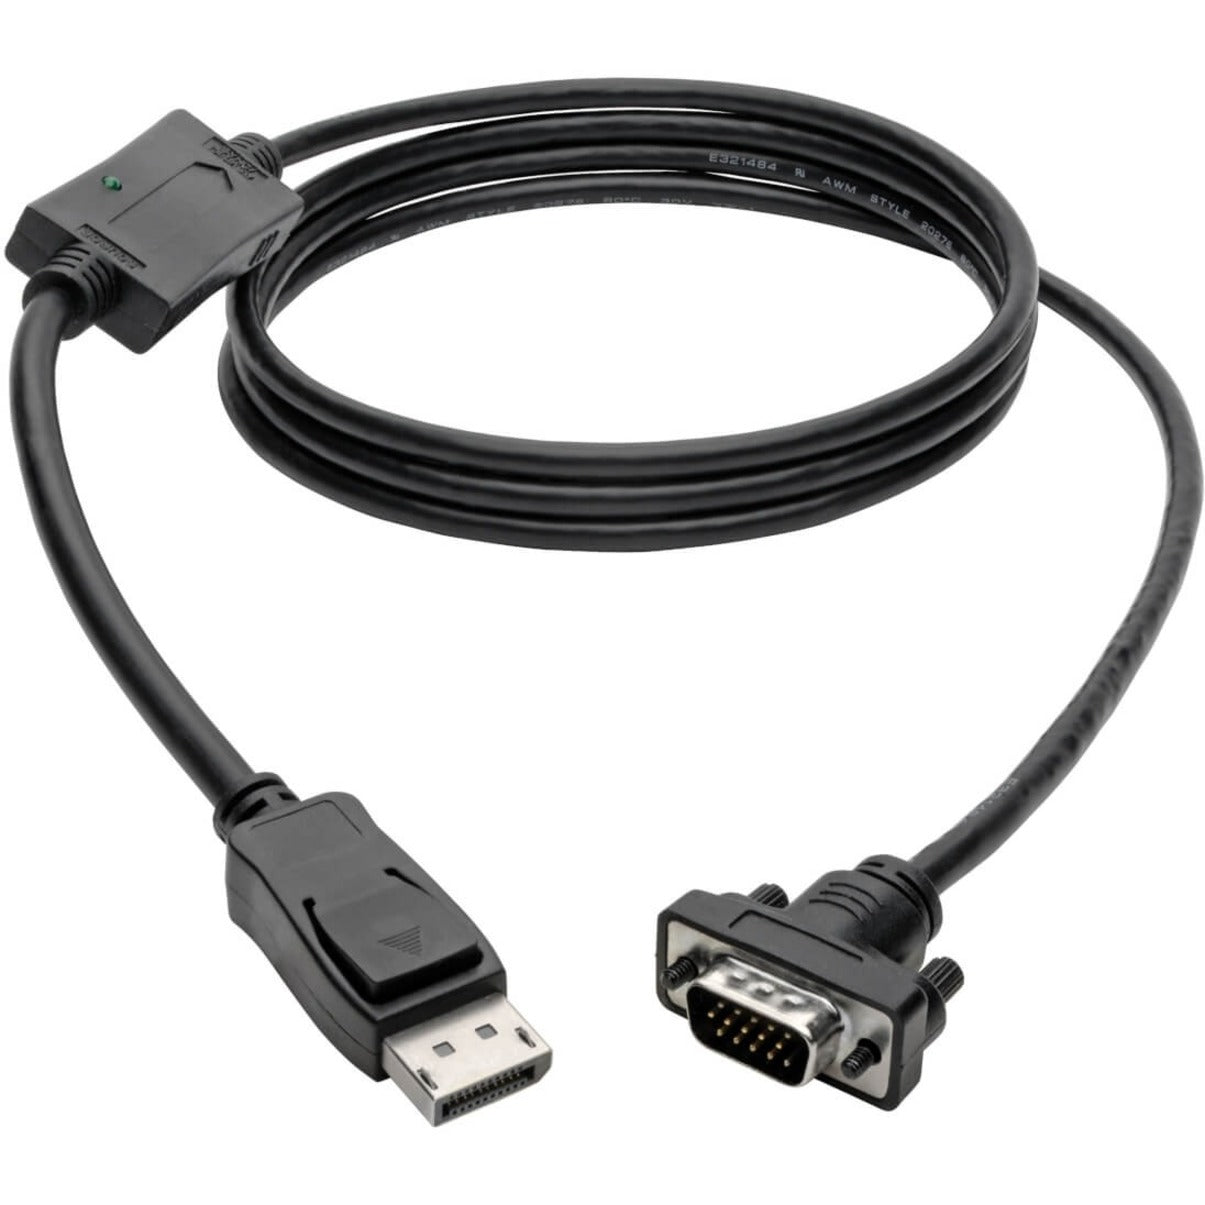 Tripp Lite P581-006-VGA DisplayPort to VGA Cable, 6-ft. Latches Adapter